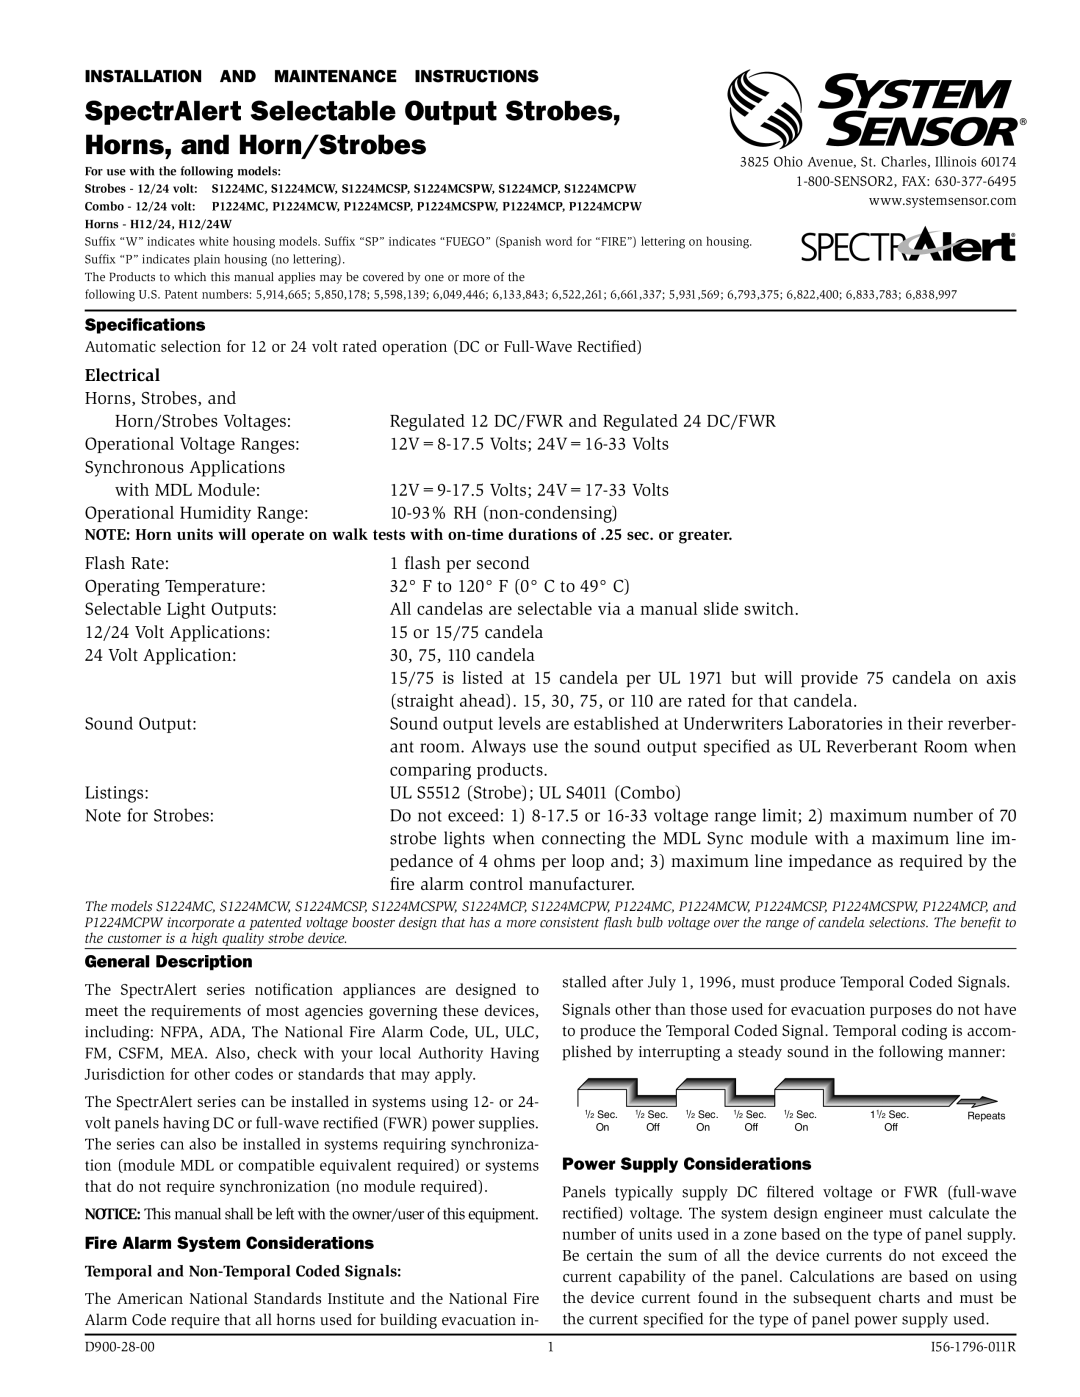 System Sensor S1224MC specifications Installation And Maintenance Instructions, Specifications, Electrical 